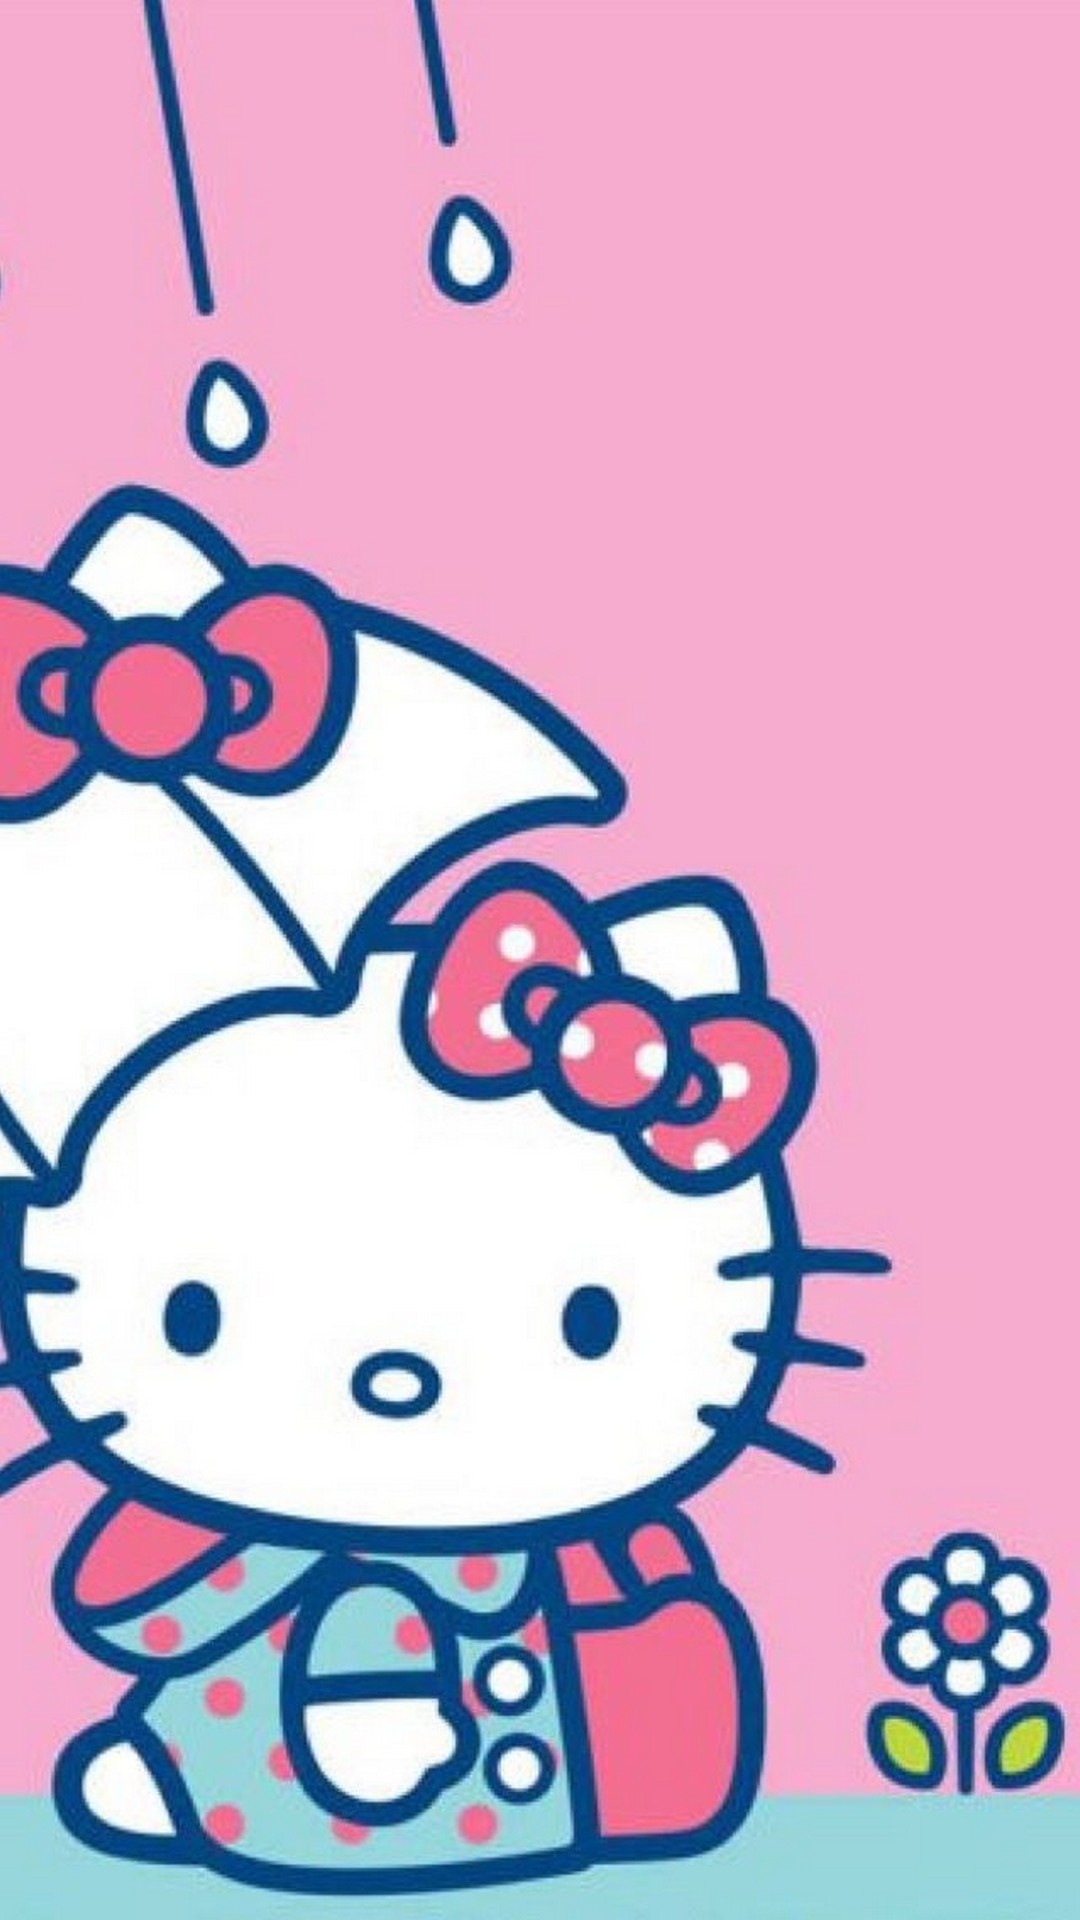 Hello Kitty Wallpaper For Mobile Android with image resolution 1080x1920 pixel. You can make this wallpaper for your Desktop Computer Backgrounds, Mac Wallpapers, Android Lock screen or iPhone Screensavers